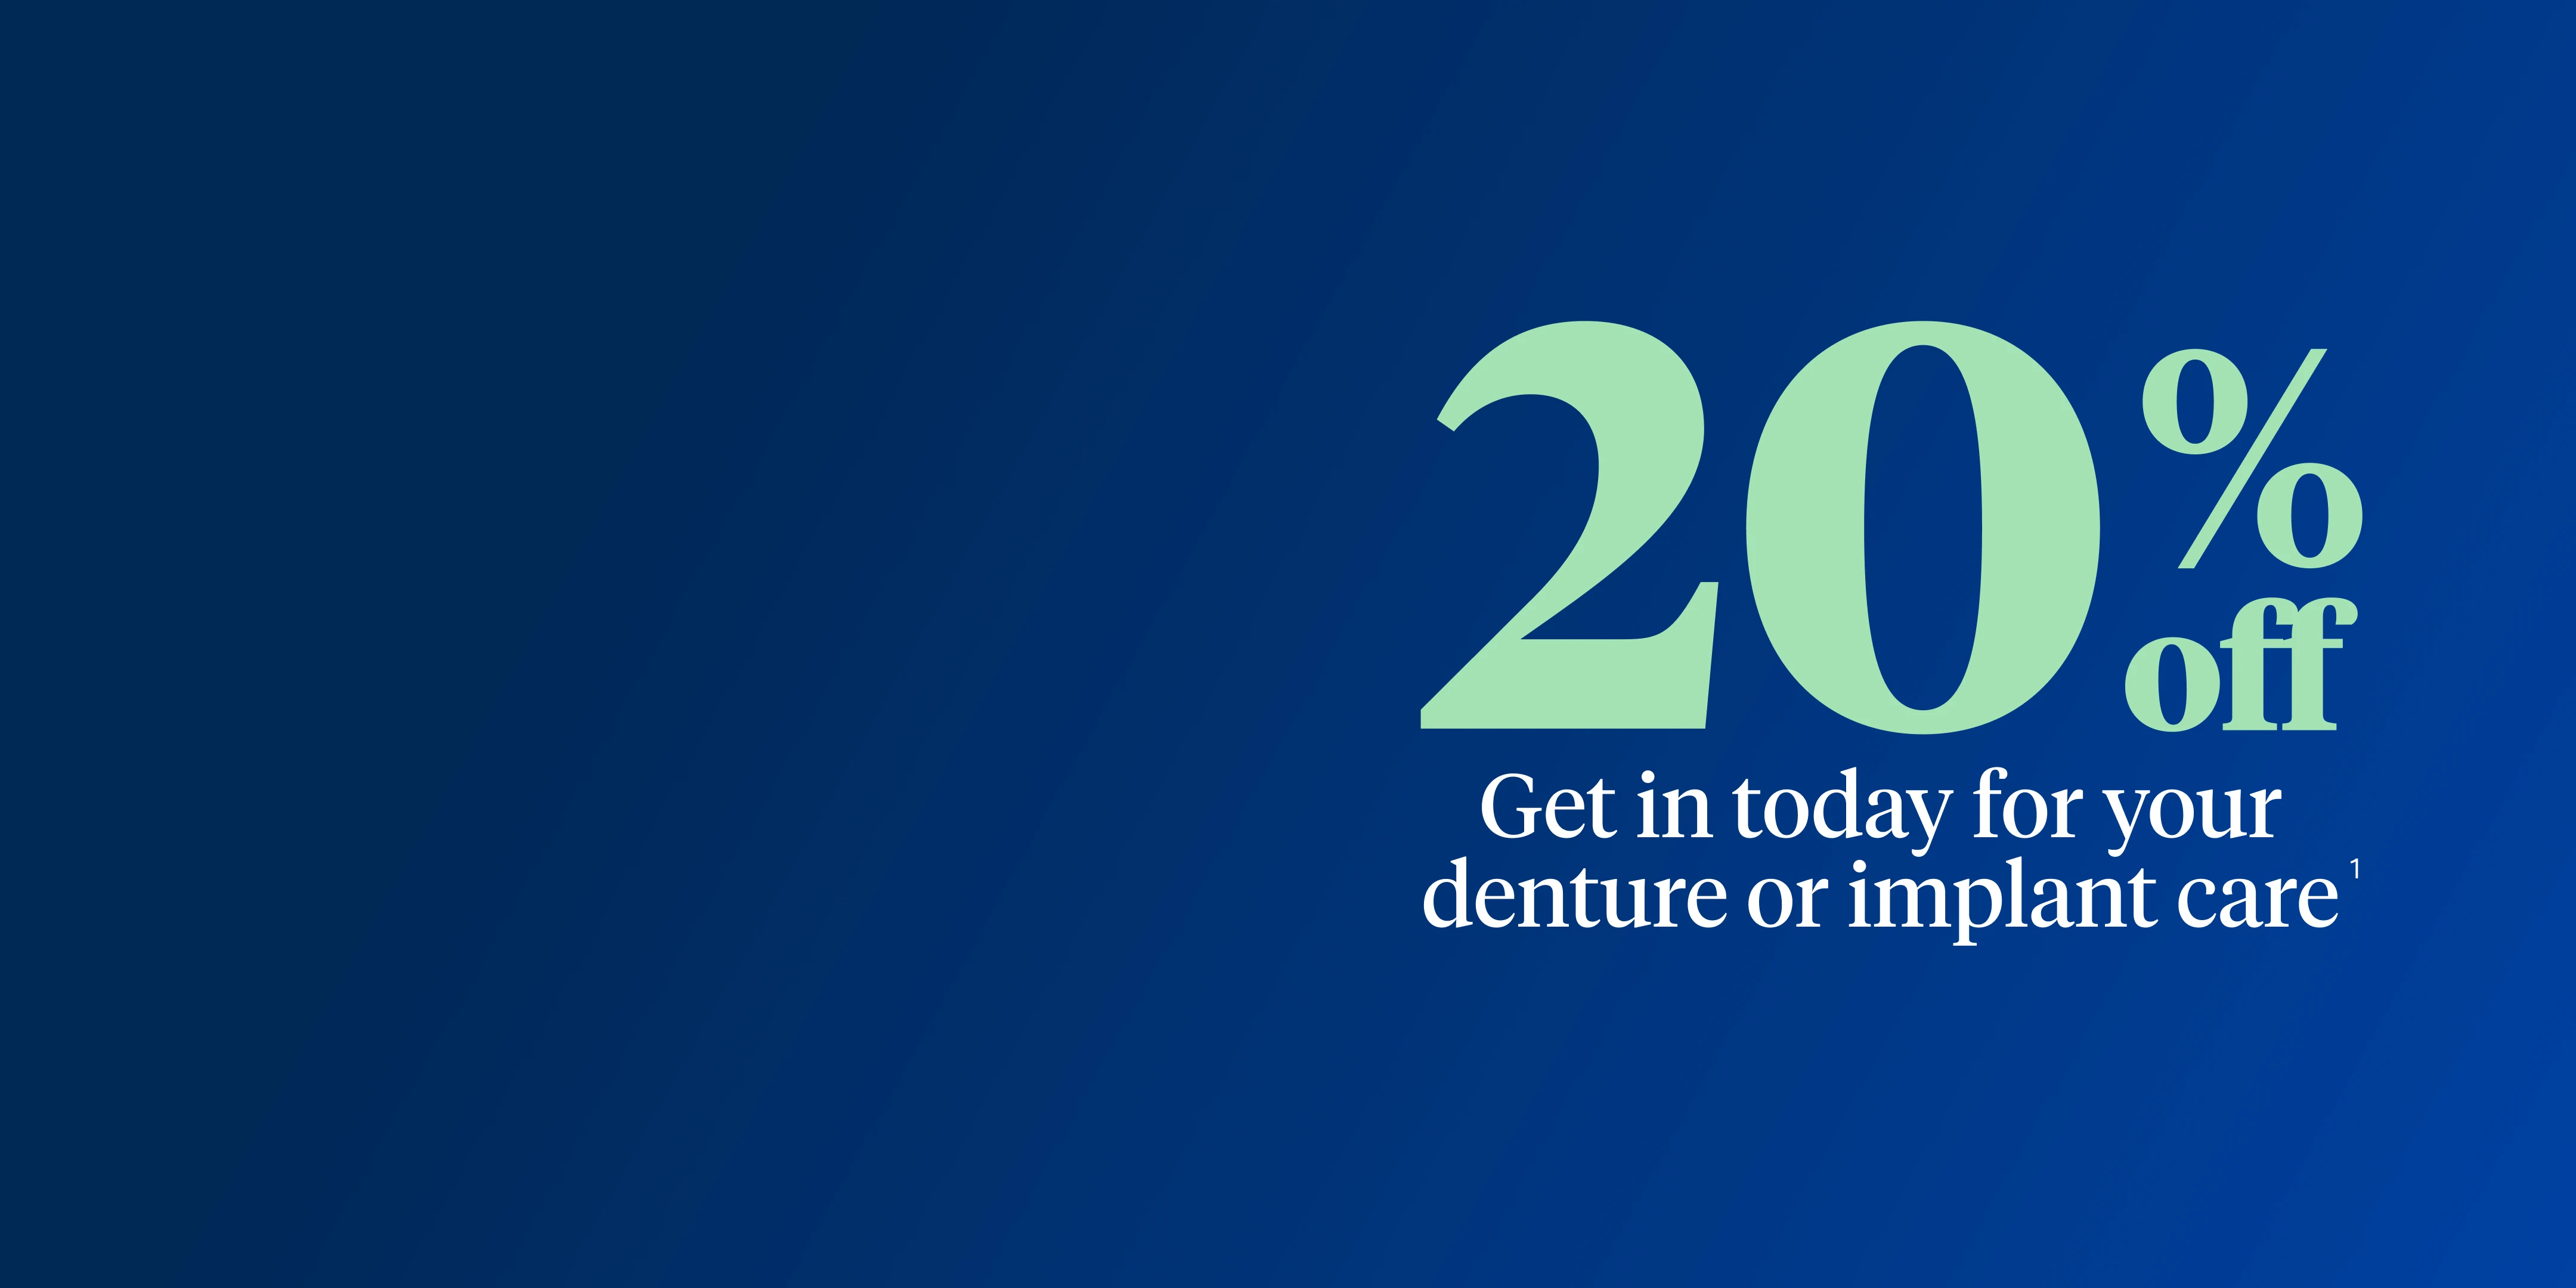 20% off. Get in today for your denture or implant care. 